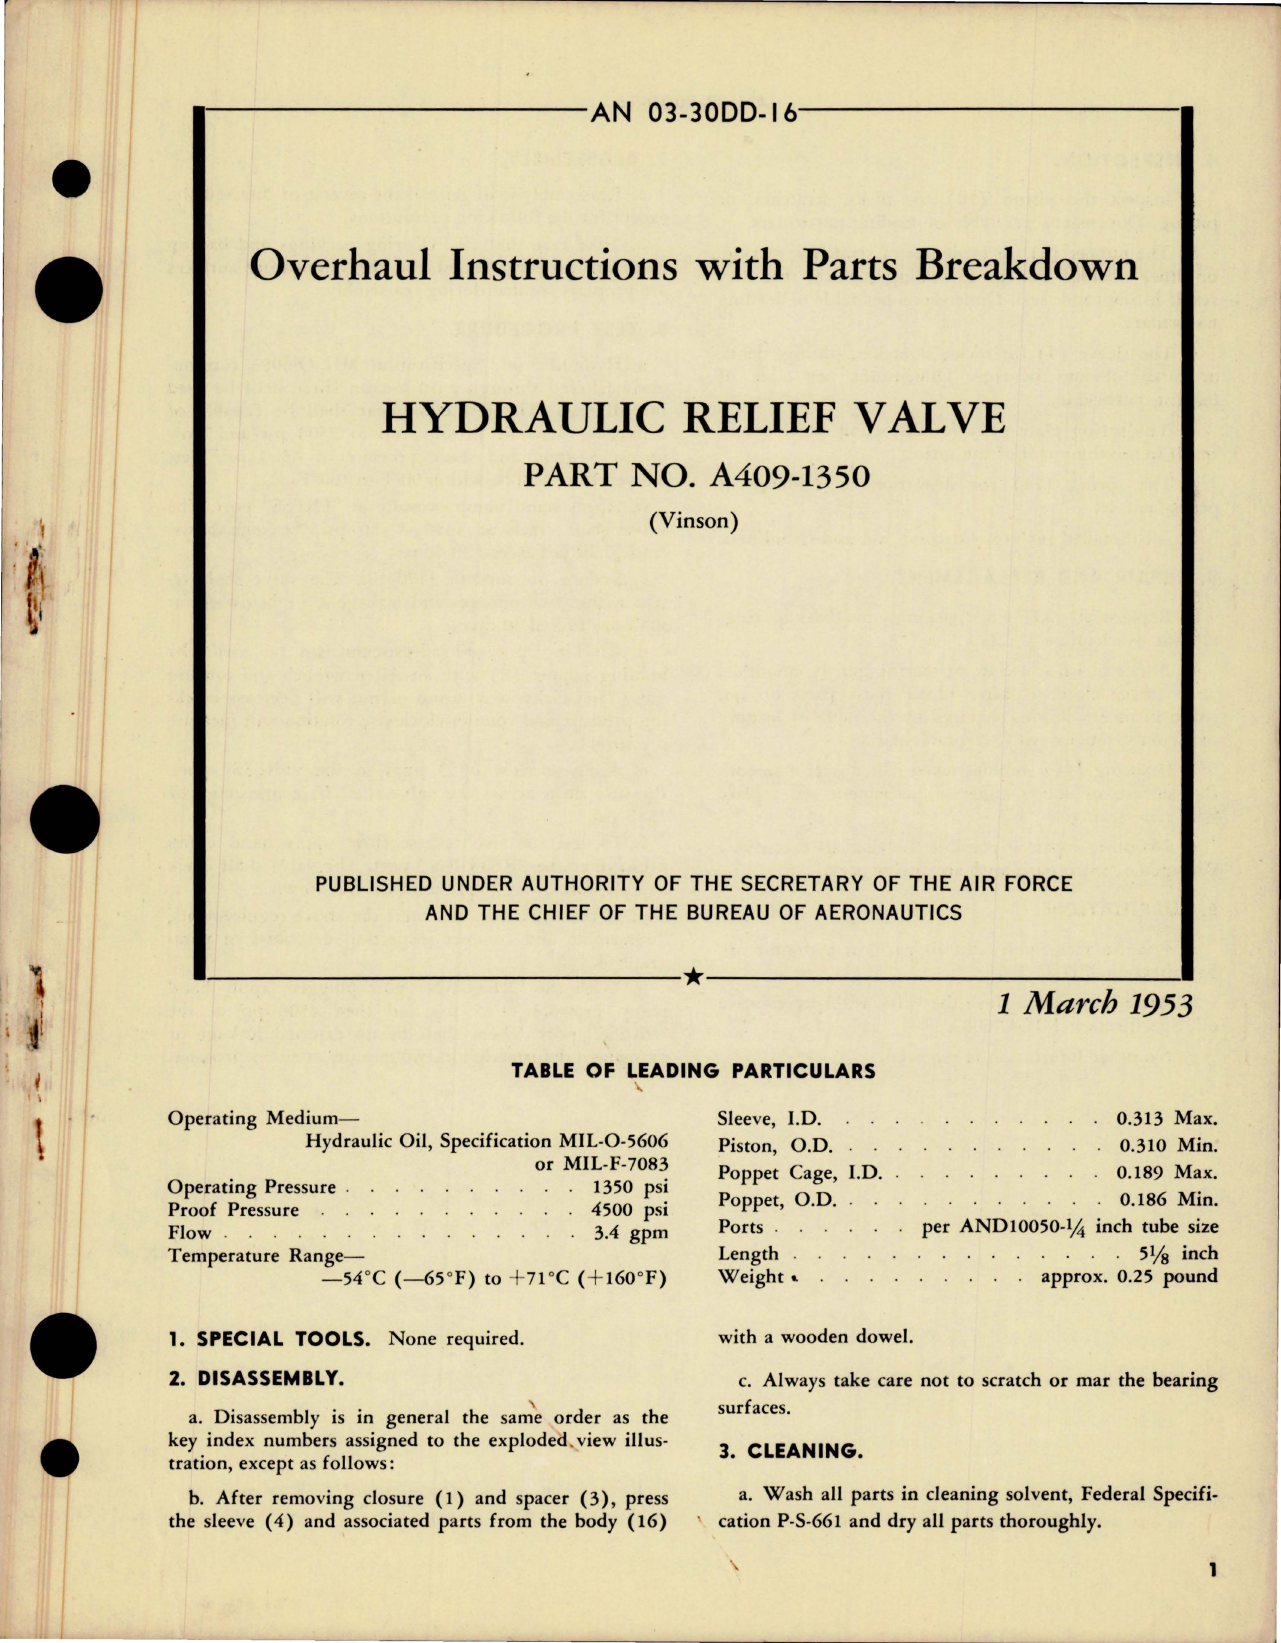 Sample page 1 from AirCorps Library document: Overhaul Instructions with Parts Breakdown for Hydraulic Relief Valve - Part A409-1350